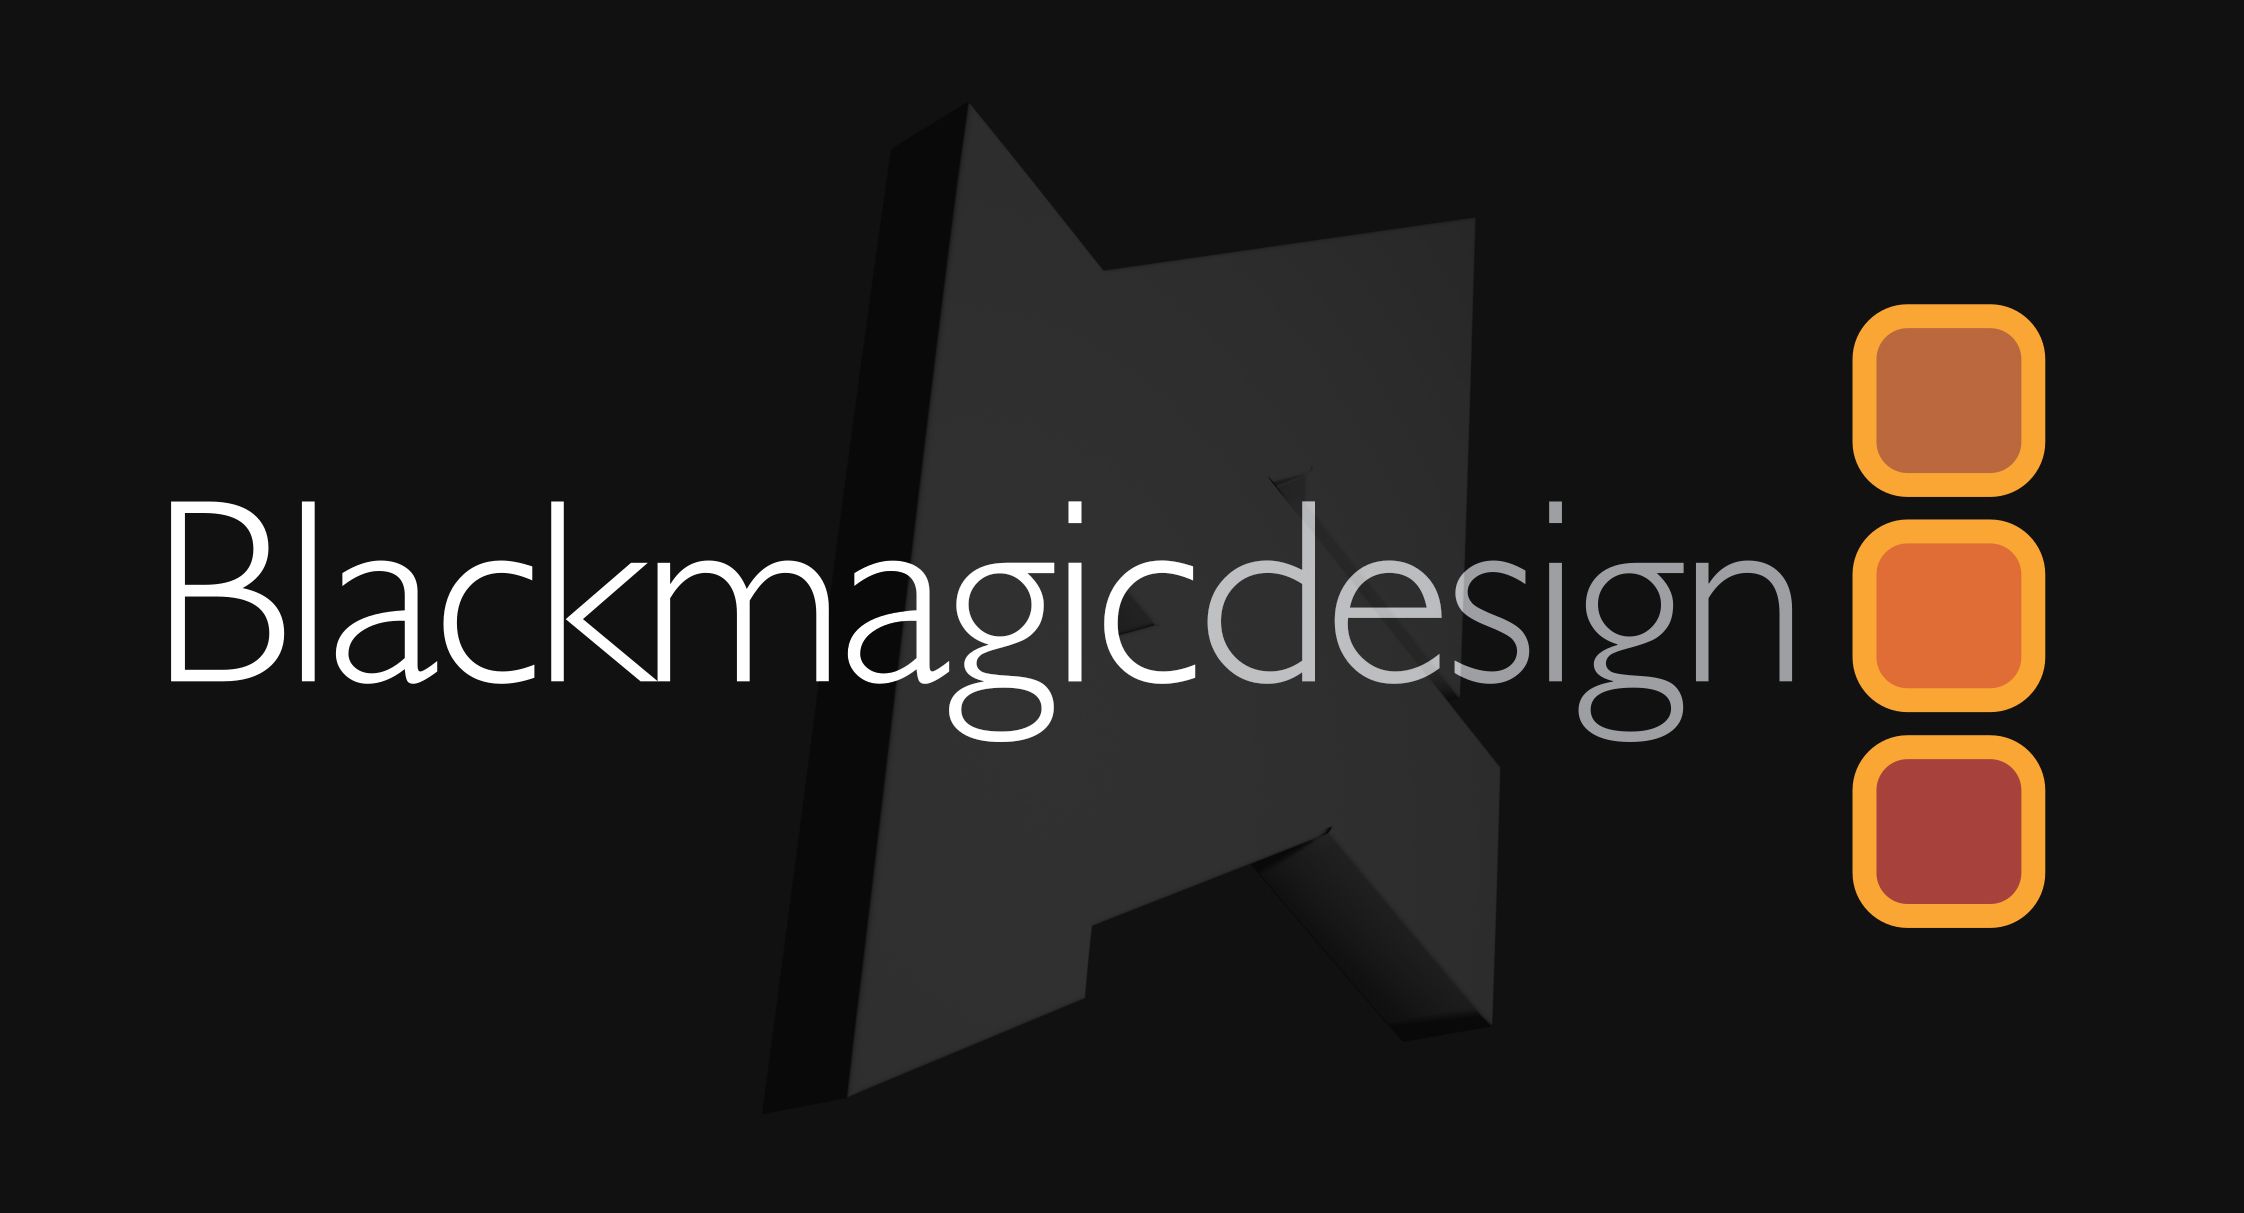 Blackmagic Design logo with AP logo in the background